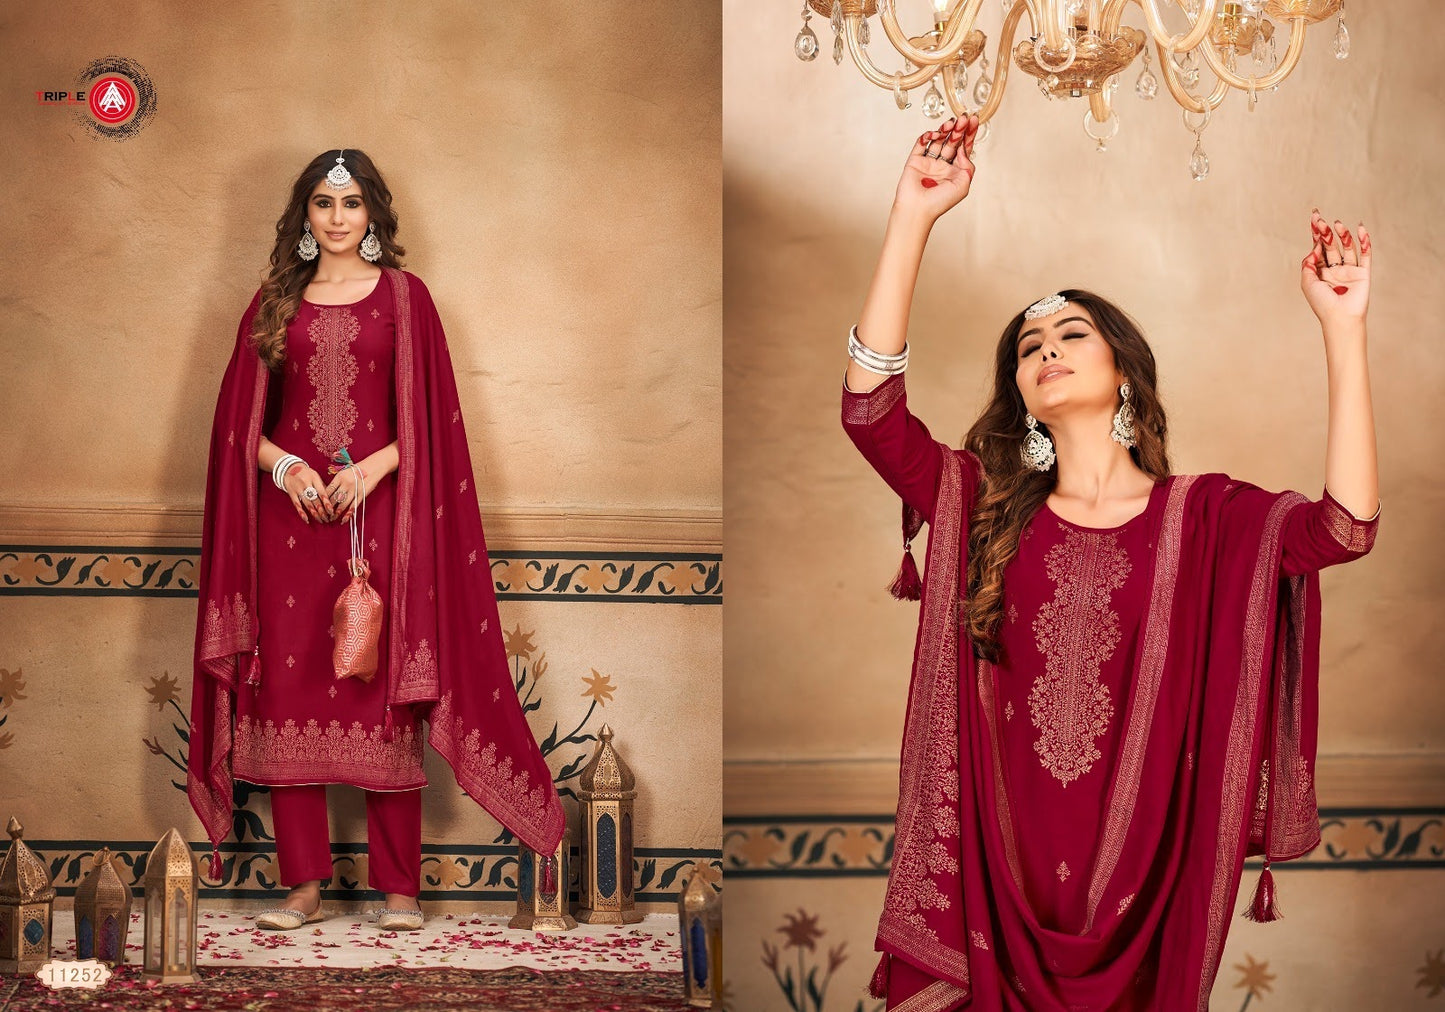 Chanchal Triple Aaa Silk Pant Style Suits